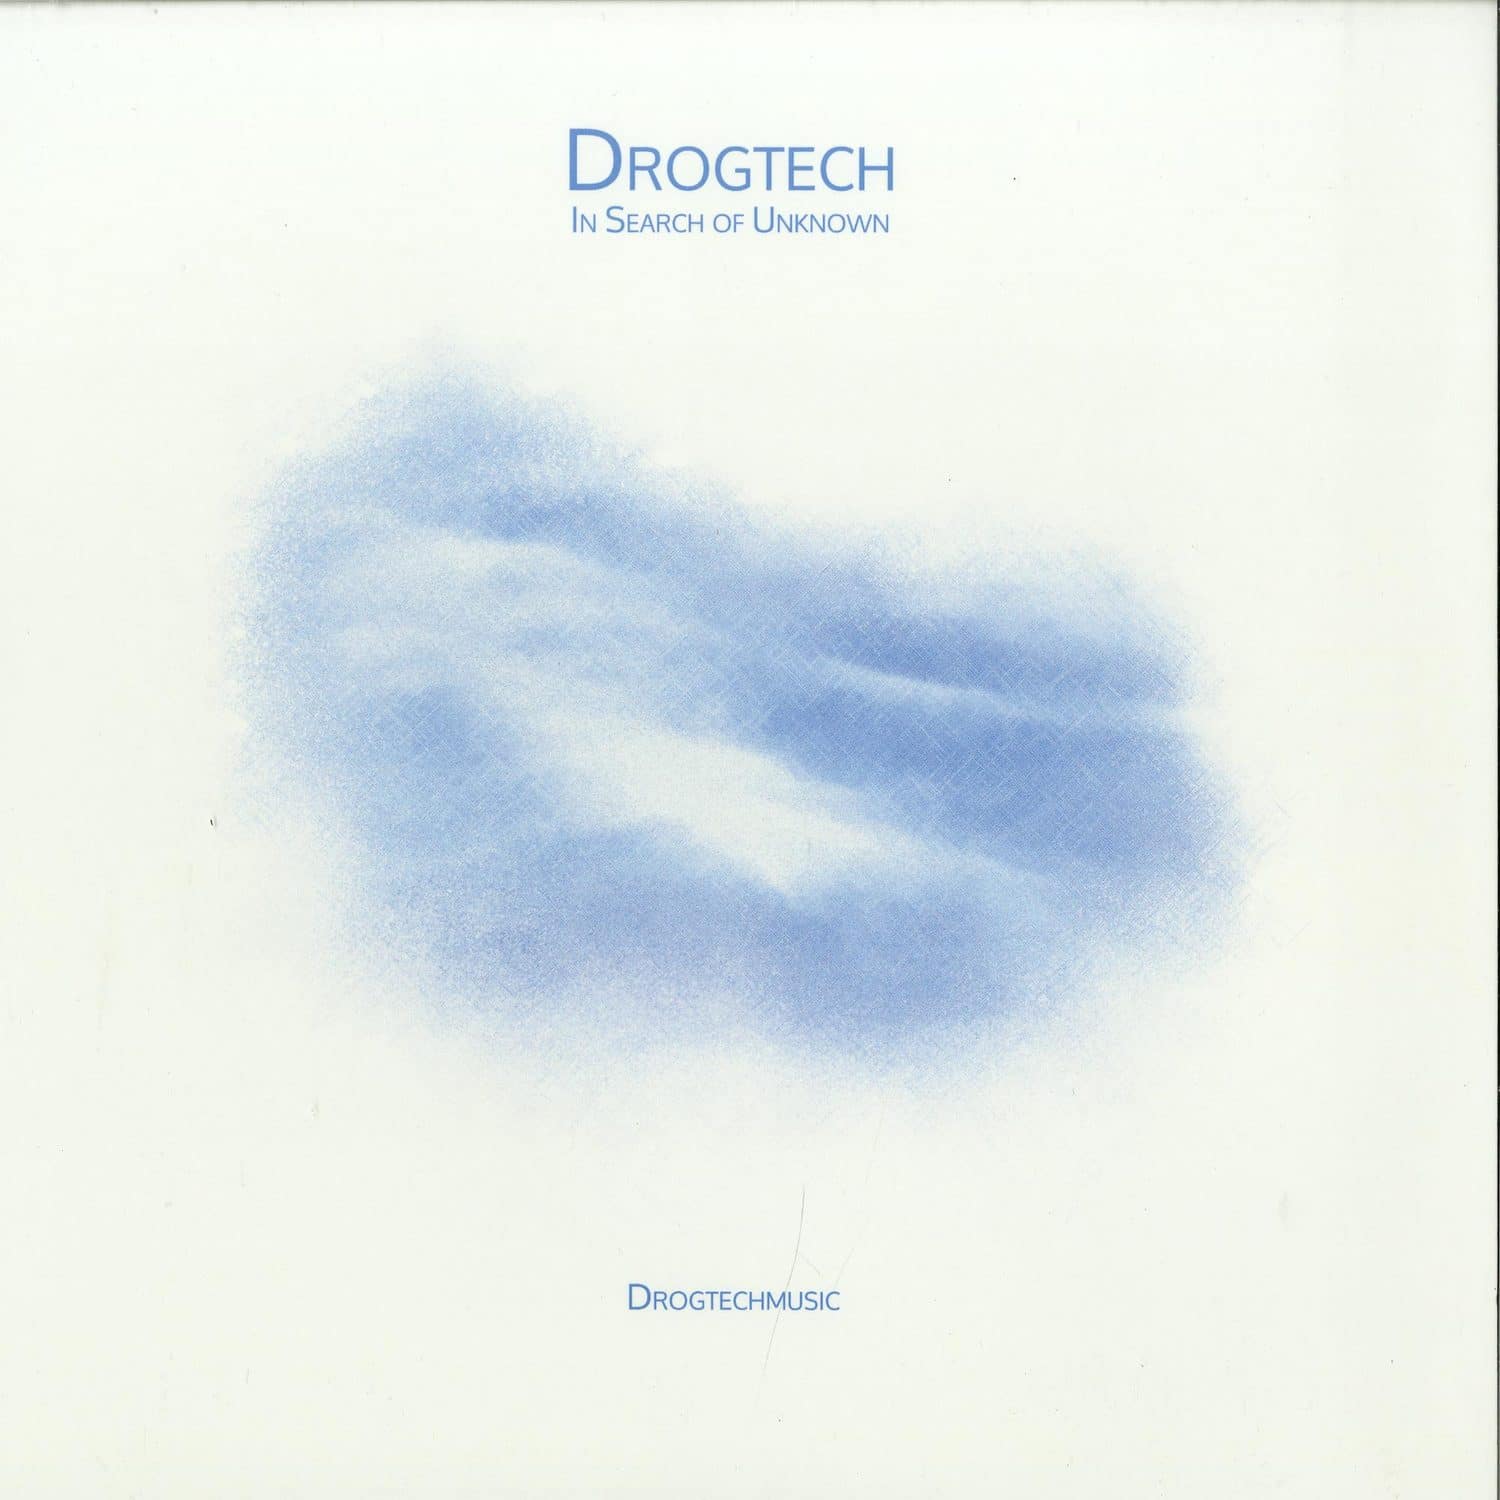 Drogtech - IN SEARCH OF UNKNOWN 